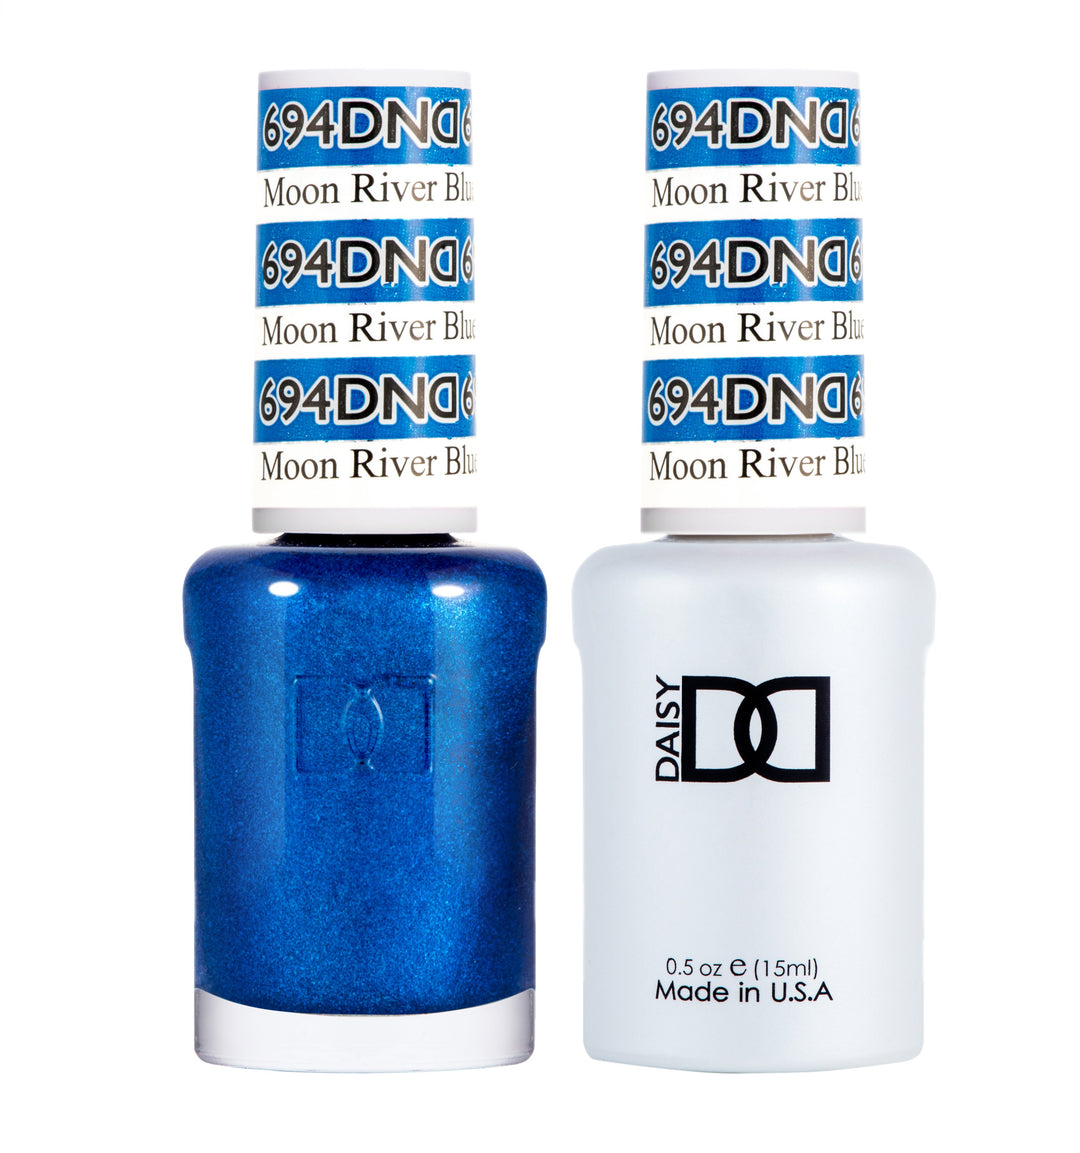 DND DUO Nail Lacquer and UV|LED Gel Polish Moon River Blue 694 (2 x 15ml)